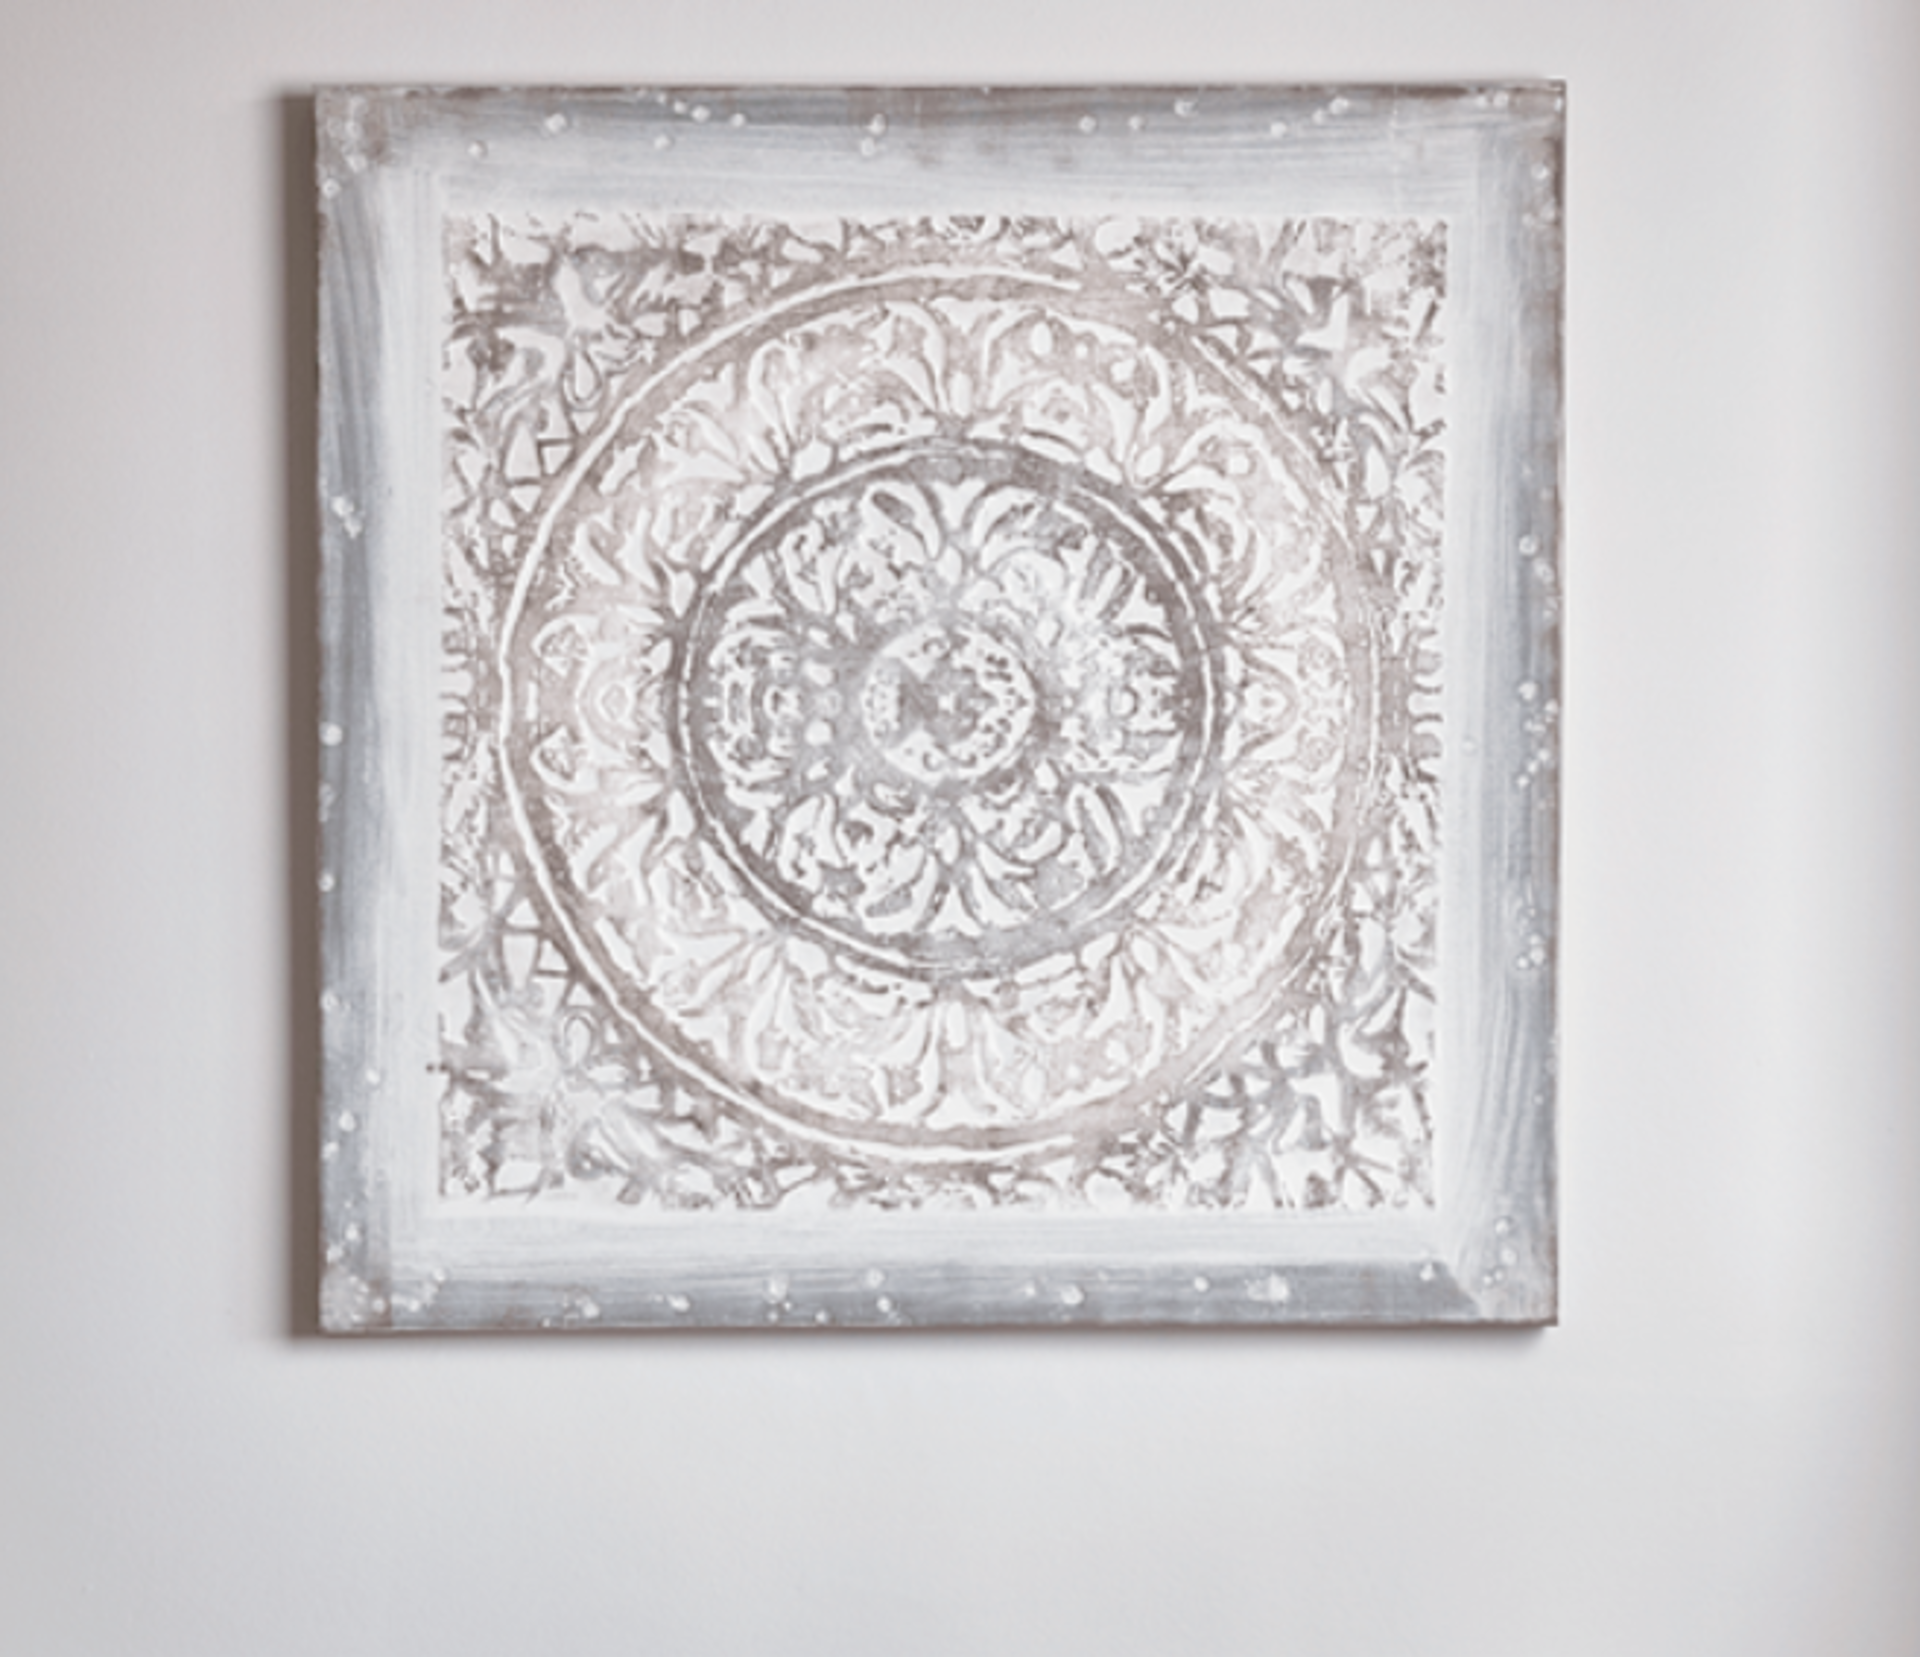 Whitewashed Spyra Panel. RRP £225.00. Inspired by traditional hand-painted terracotta tiles, our